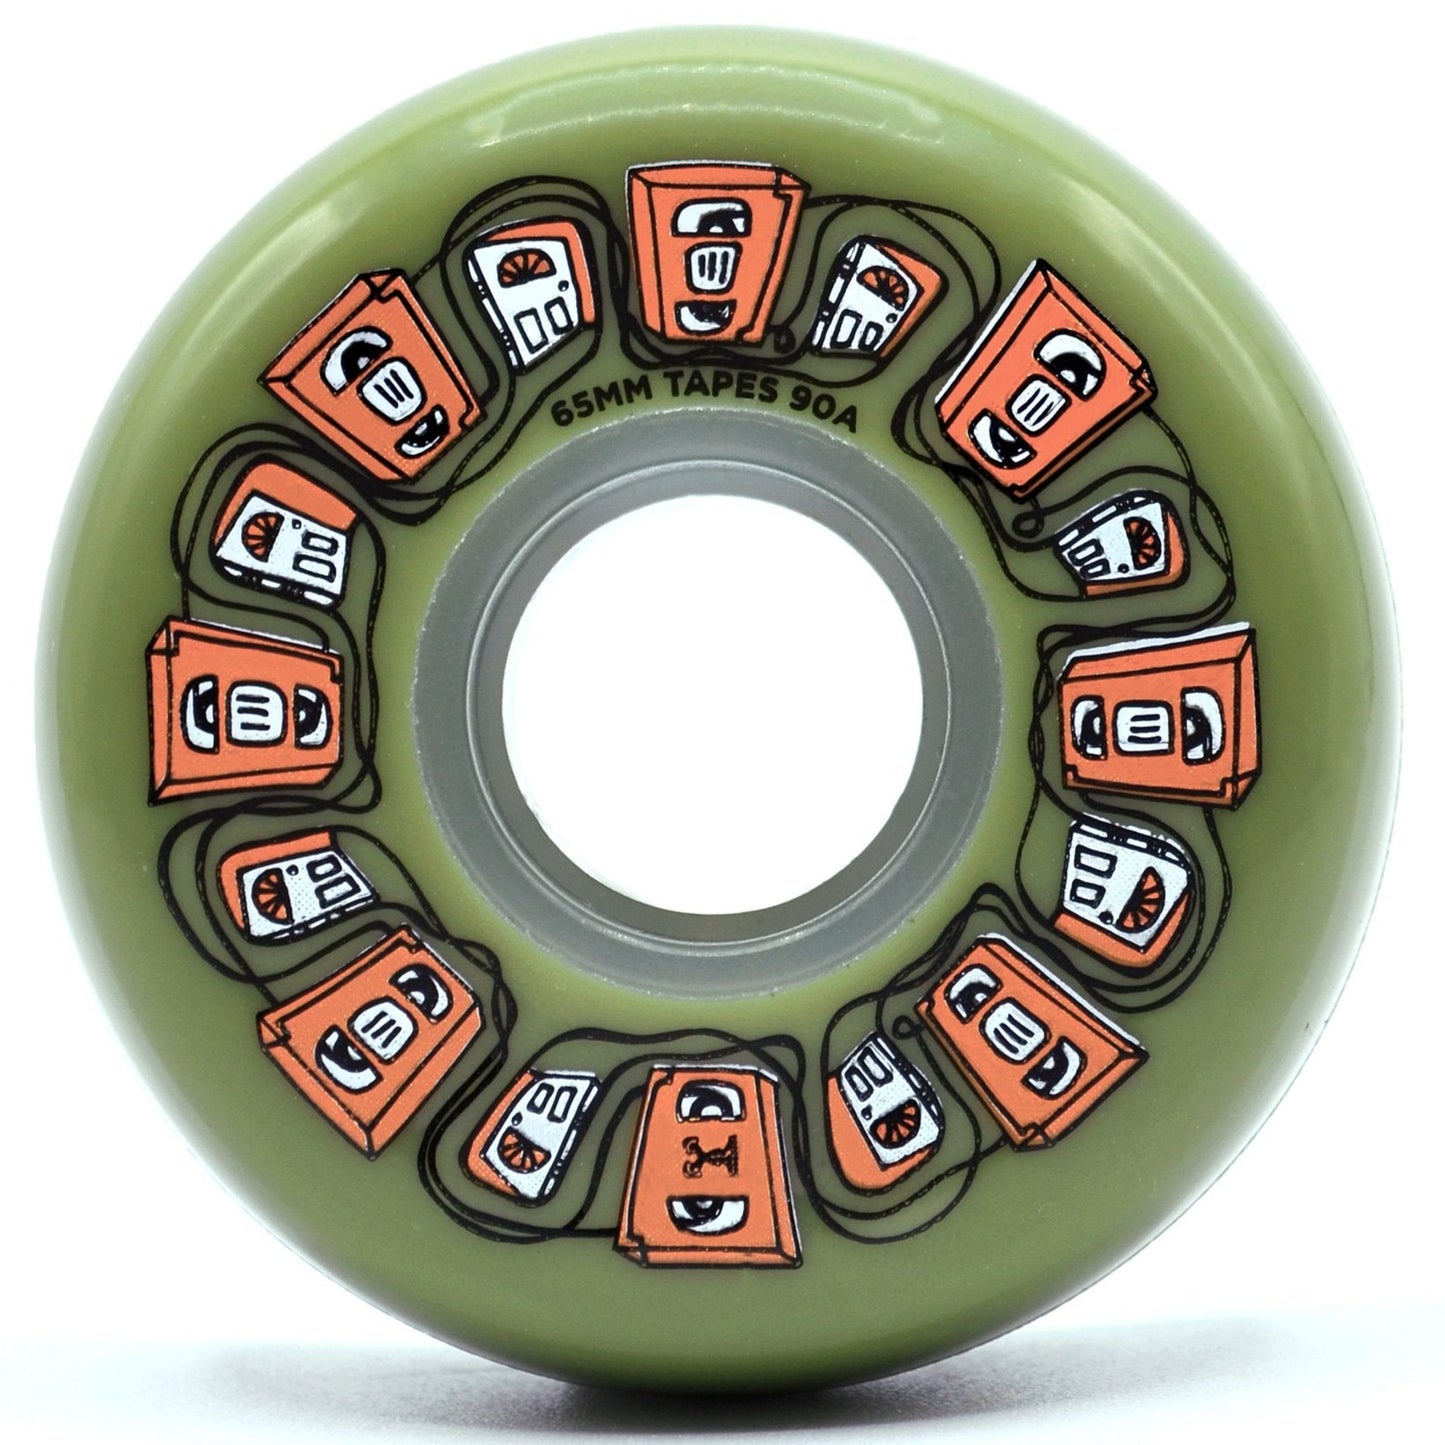 65mm 90a Tapes Wheels